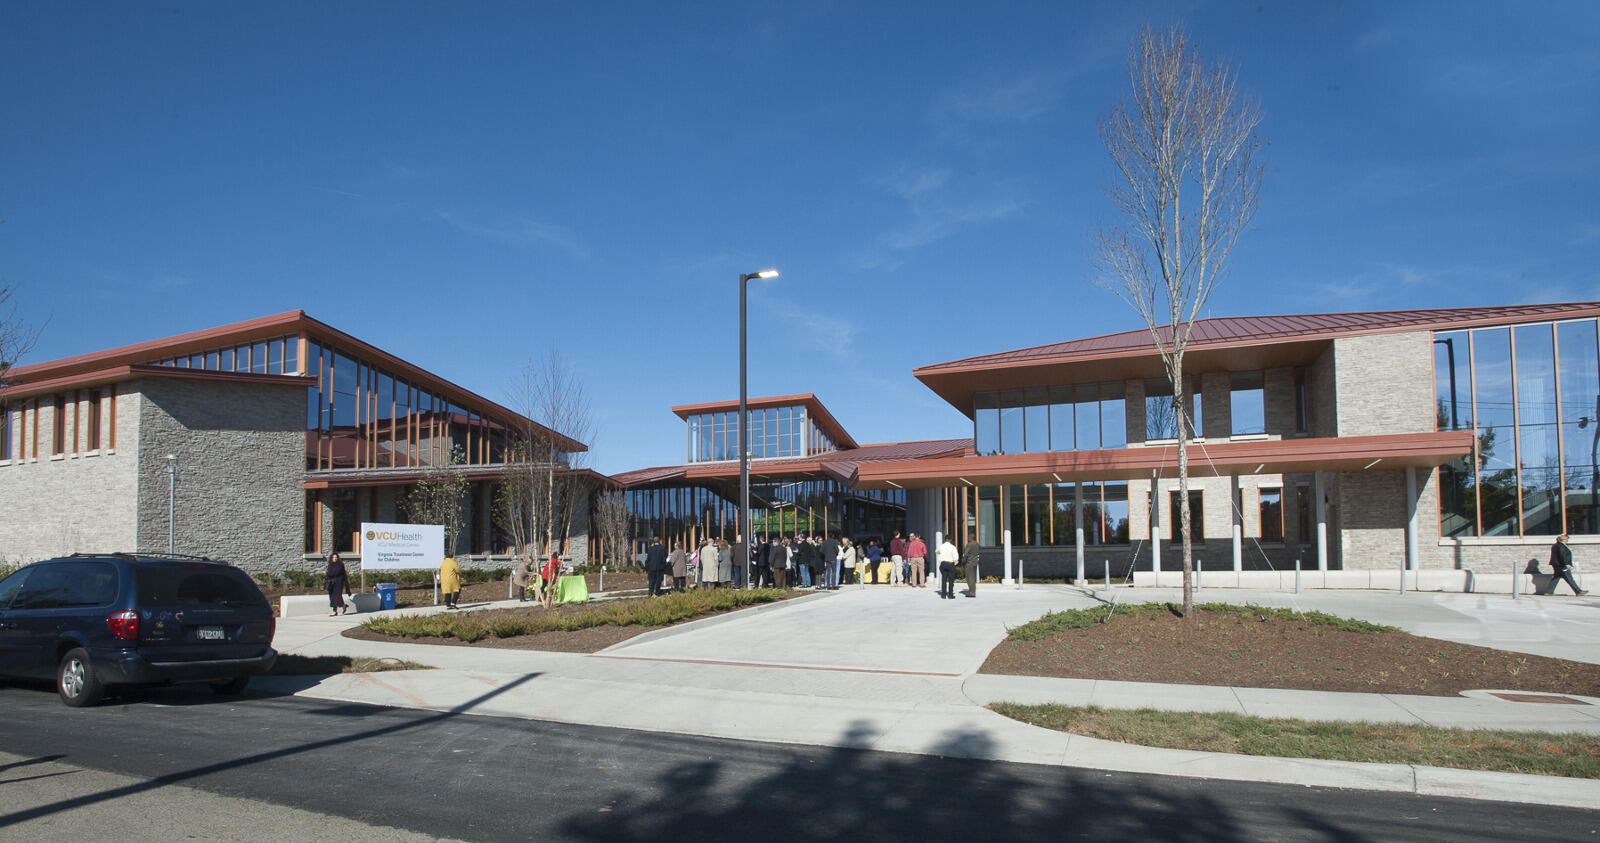 The two-story, 190,000-square-foot facility opens to children and families in early 2018.